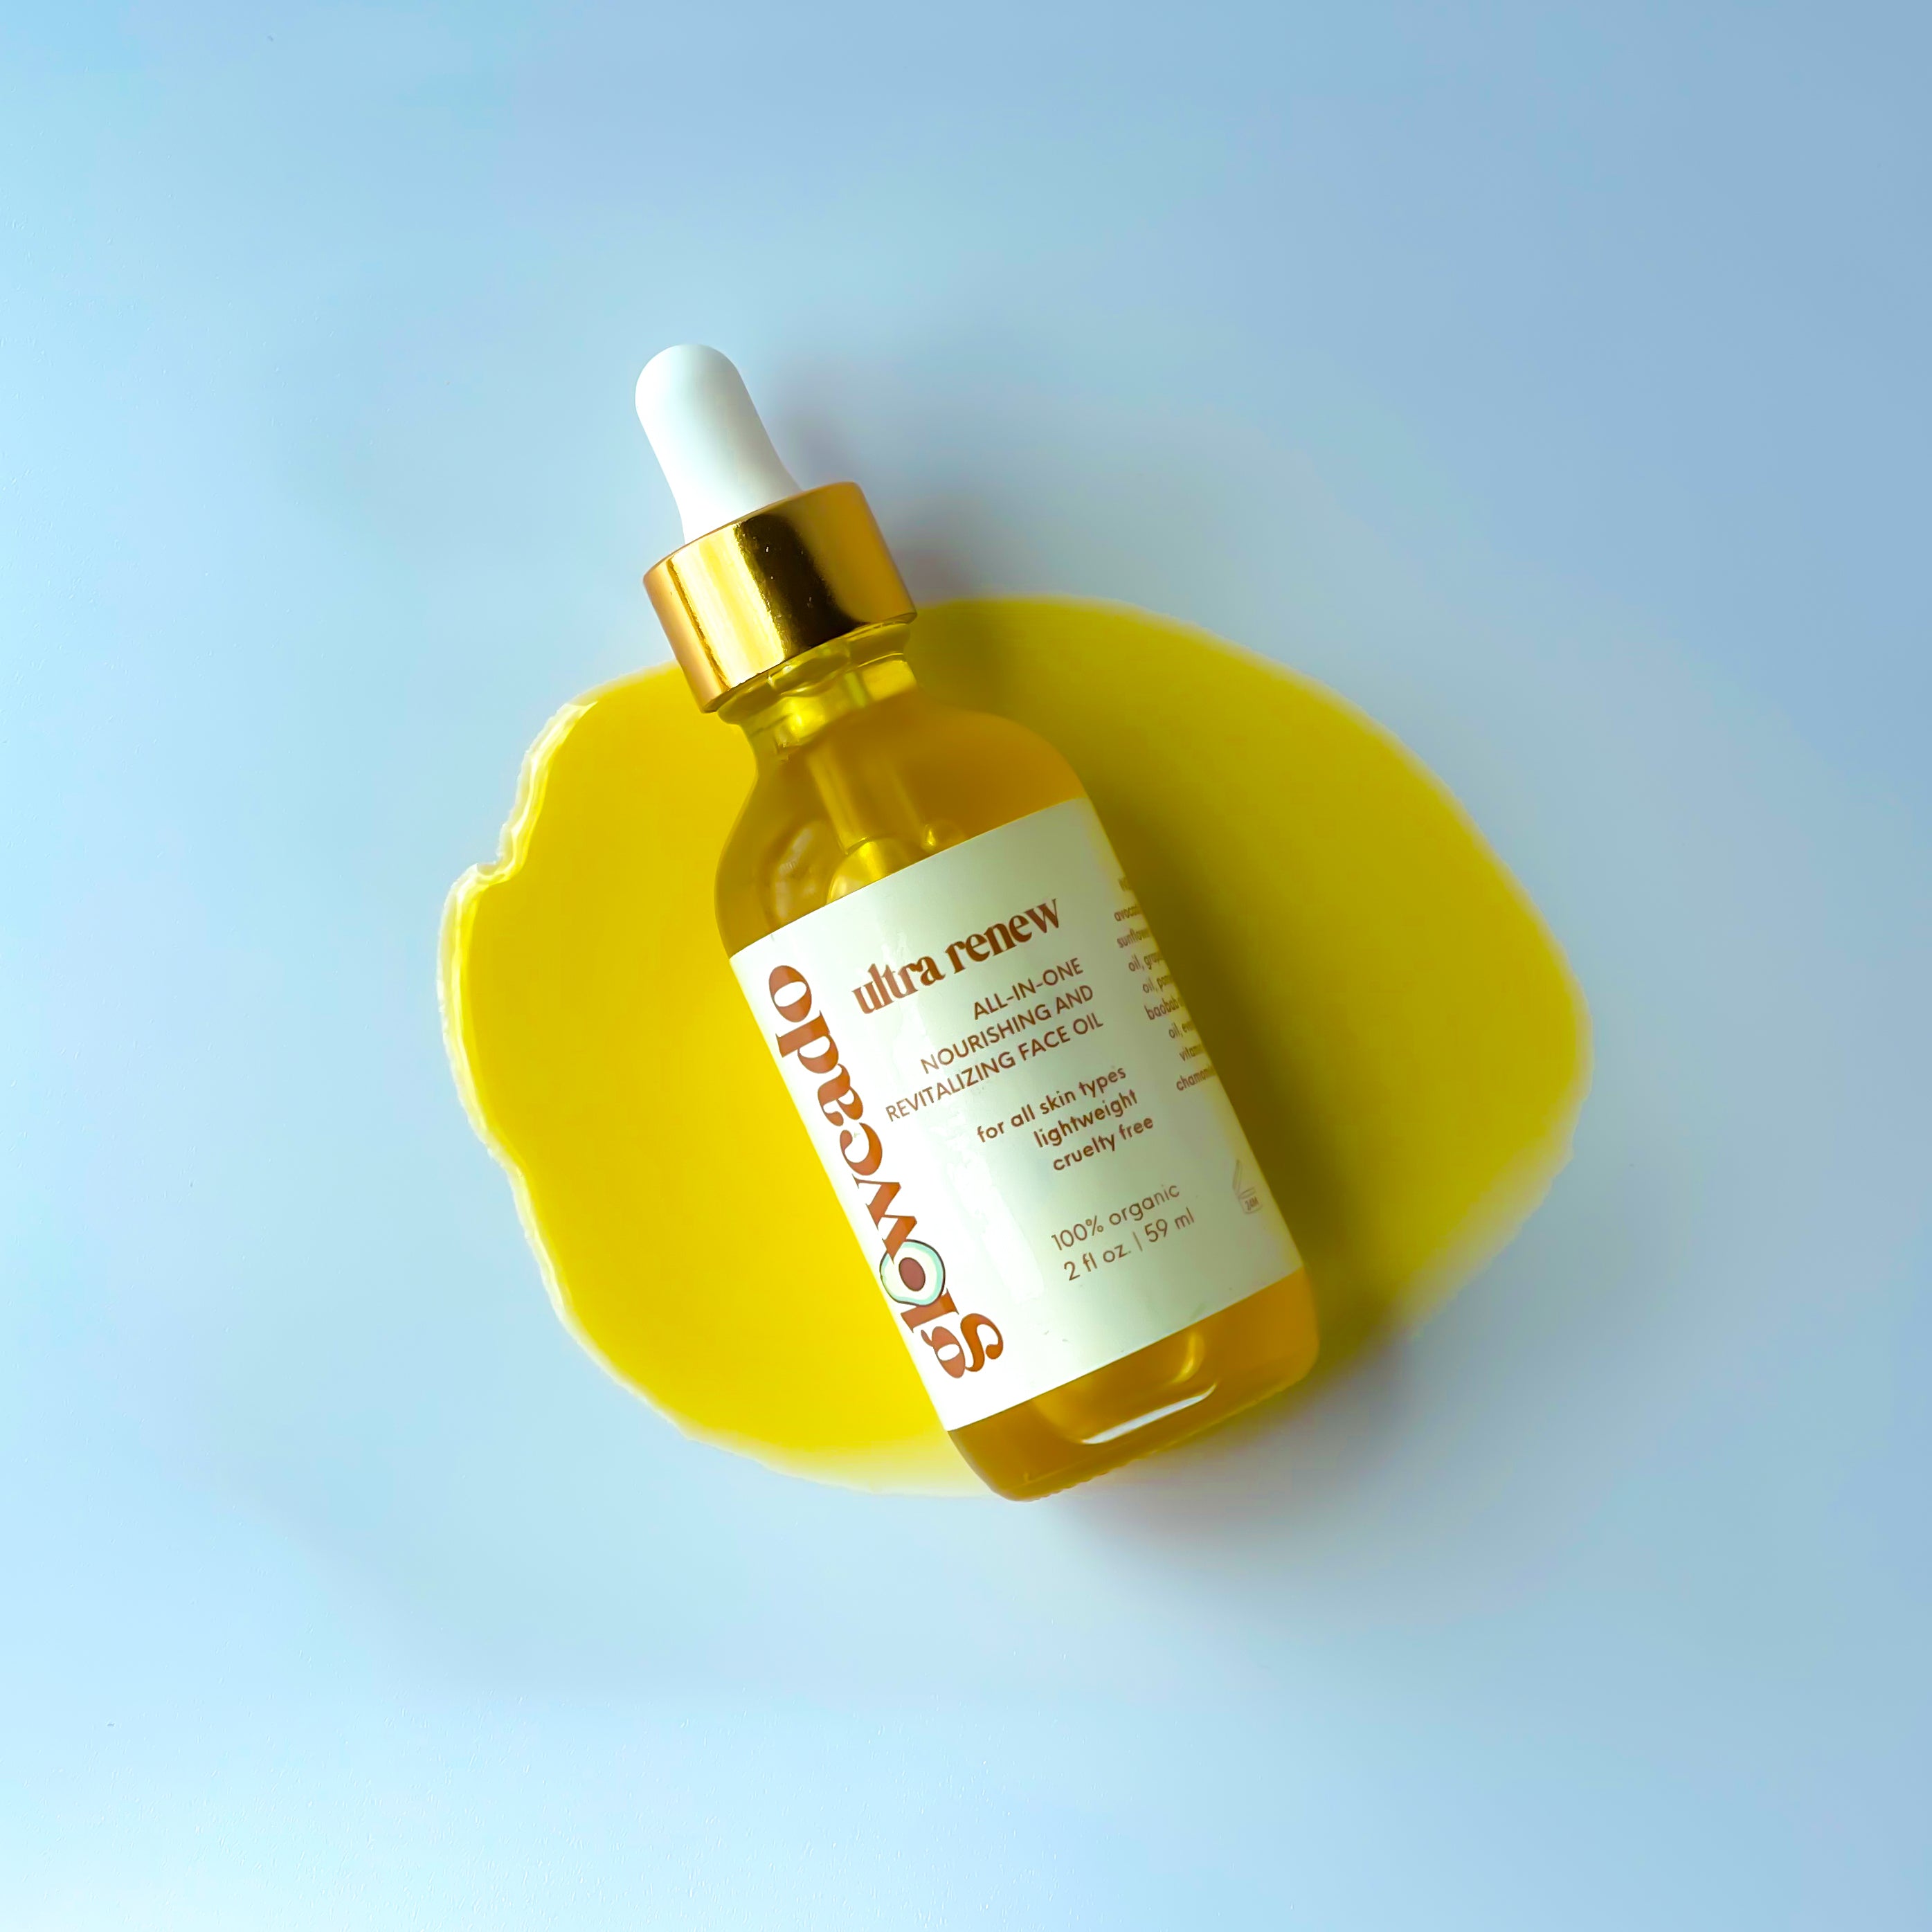 ultra renew all-in-one nourishing face oil